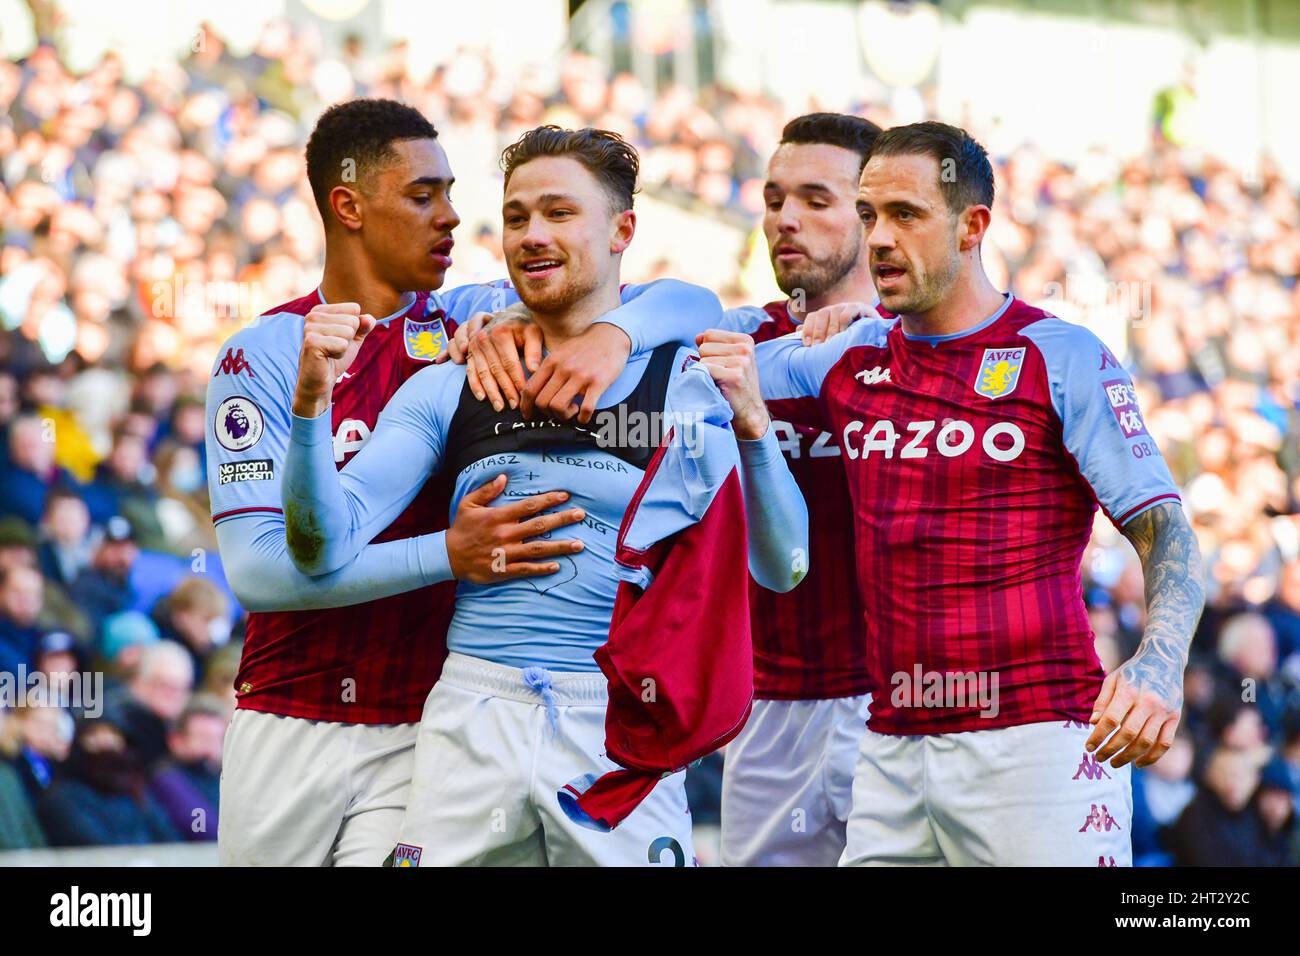 Brighton, UK. 26th Feb, 2022. Matthew Cash of Aston Villa celebrates with his teammates after scoring the opening goal during the Premier League match between Brighton & Hove Albion and Aston Villa at The Amex on February 26th 2022 in Brighton, England. (Photo by Jeff Mood/phcimages.com) Credit: PHC Images/Alamy Live News Stock Photo